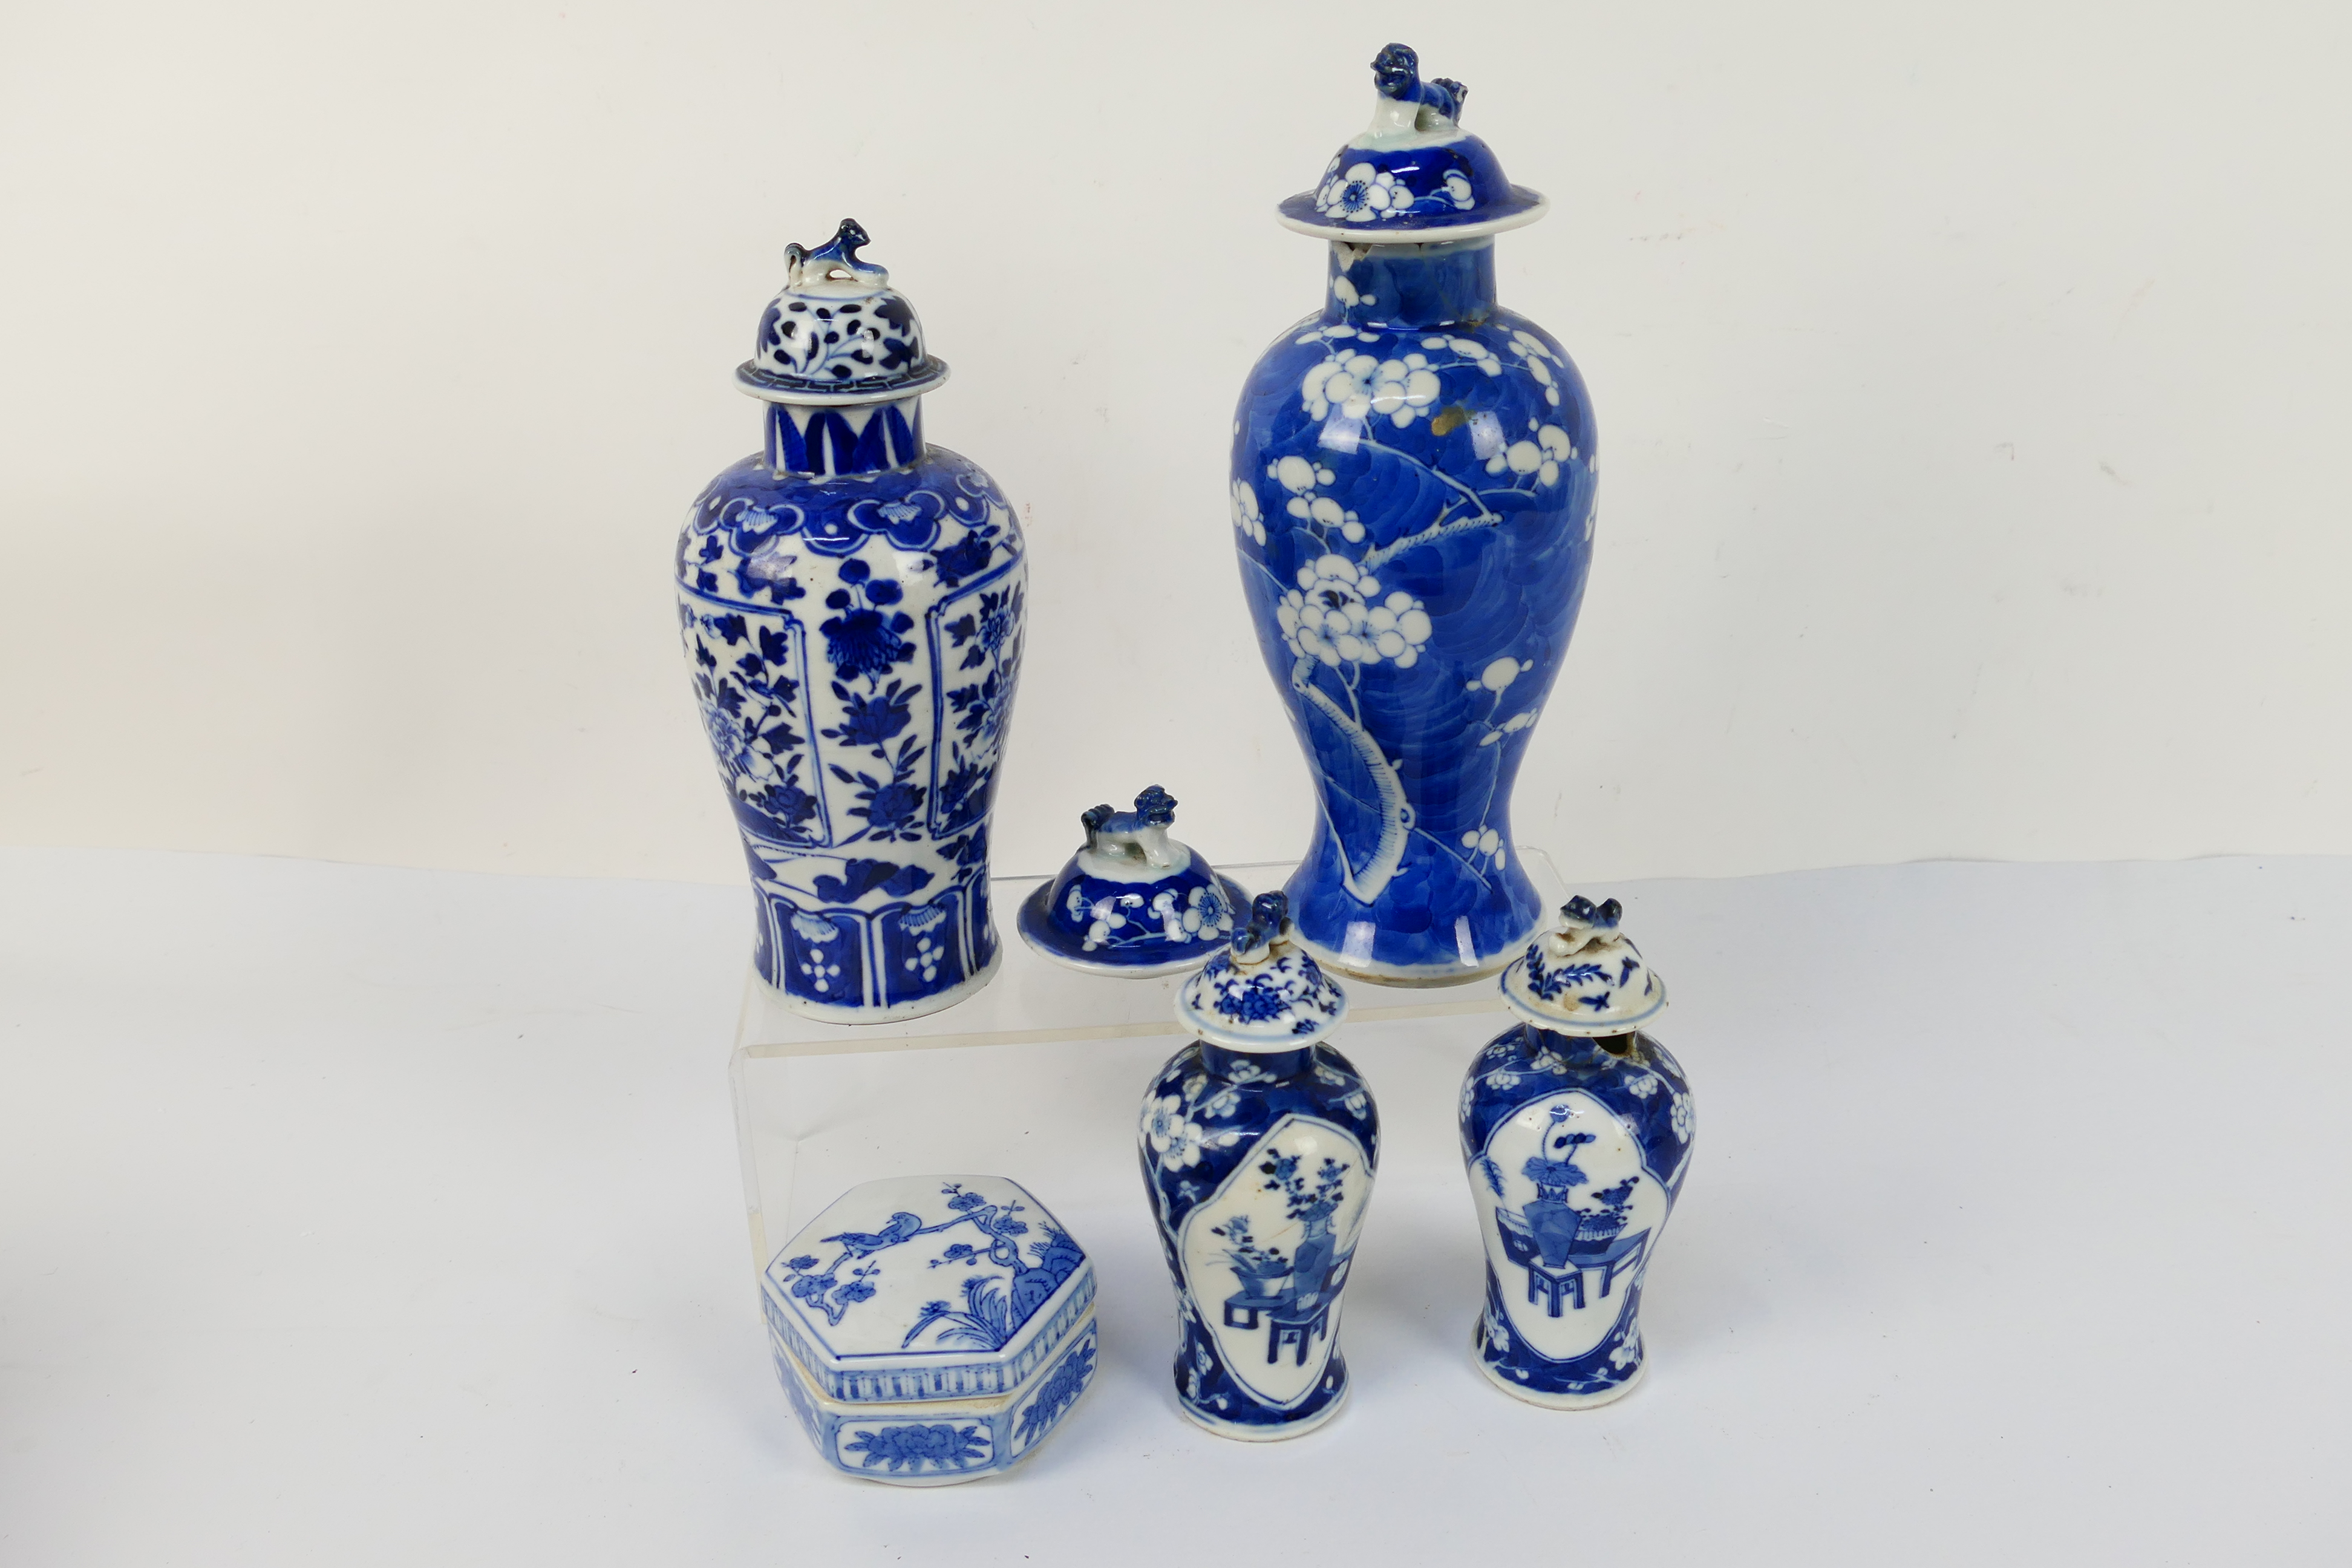 A group of 19th Century blue and white Chinese pottery covered vases of varying heights ranging